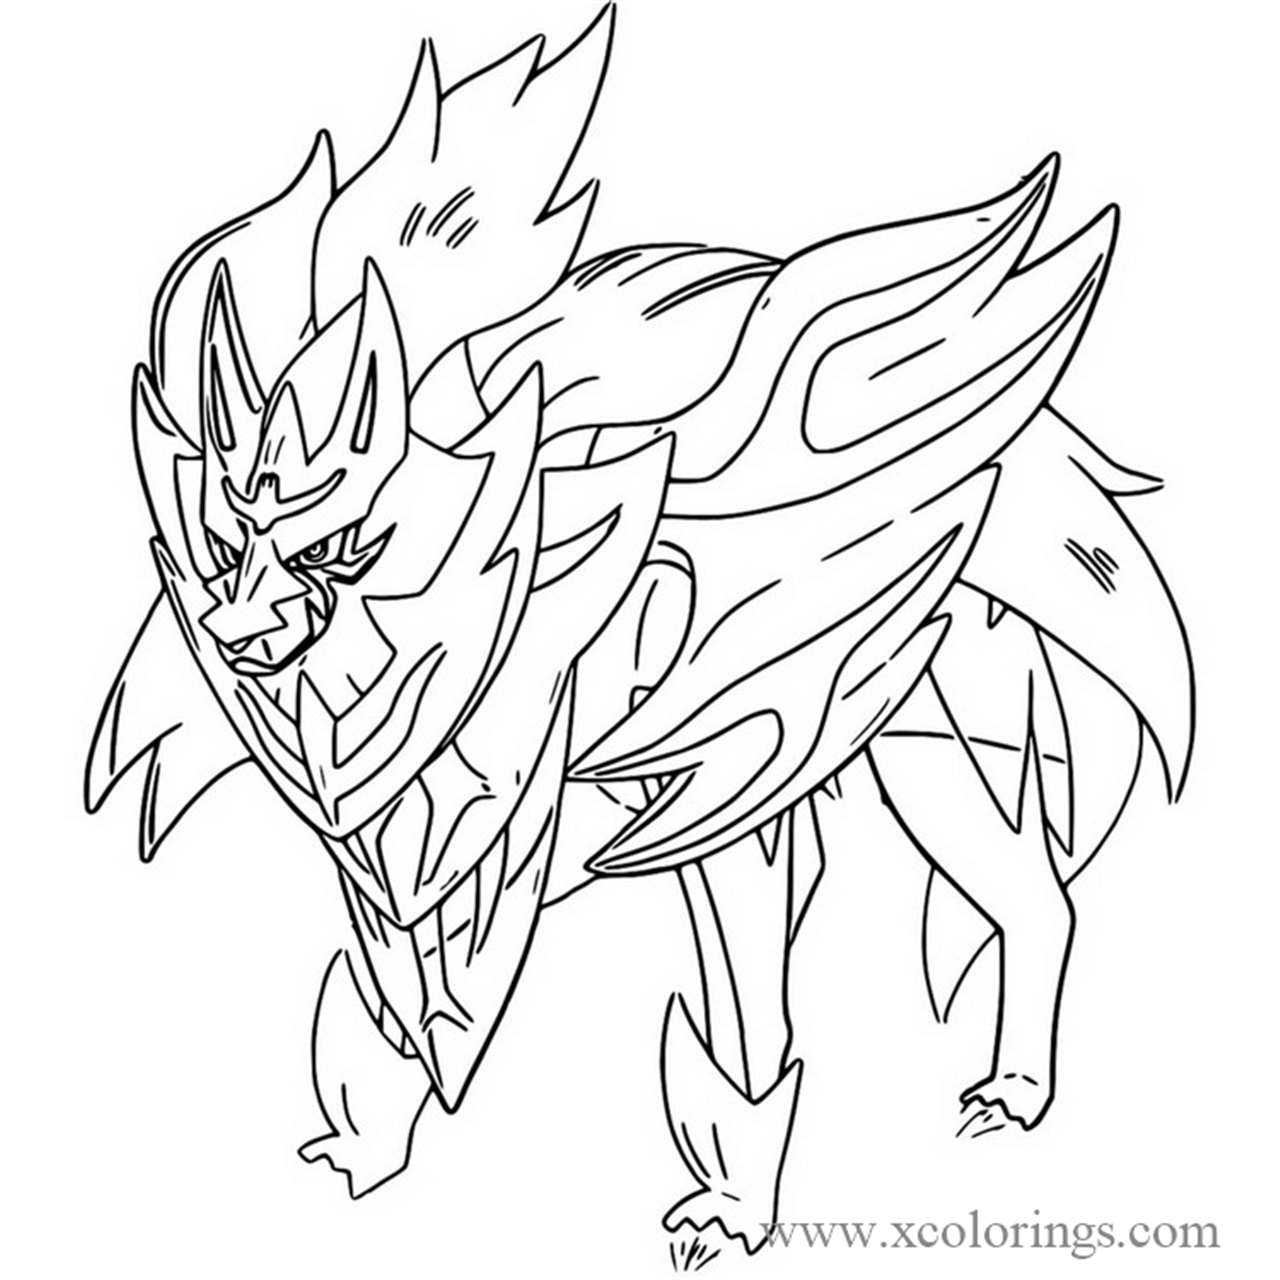 Free Zamazenta from Pokemon Sword and Shield Coloring Pages printable